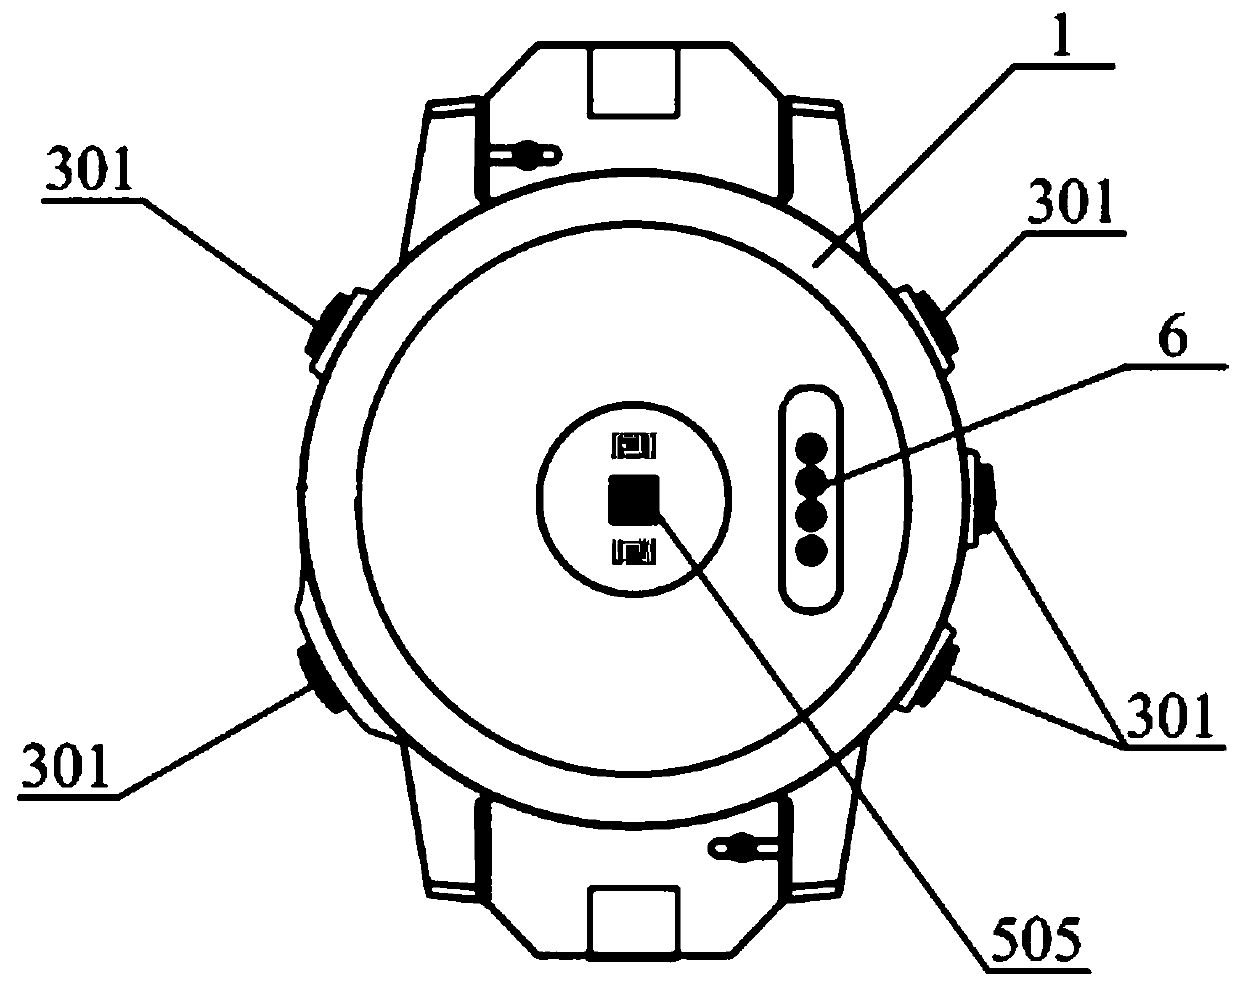 Quick time service watch based on Beidou No.3 system